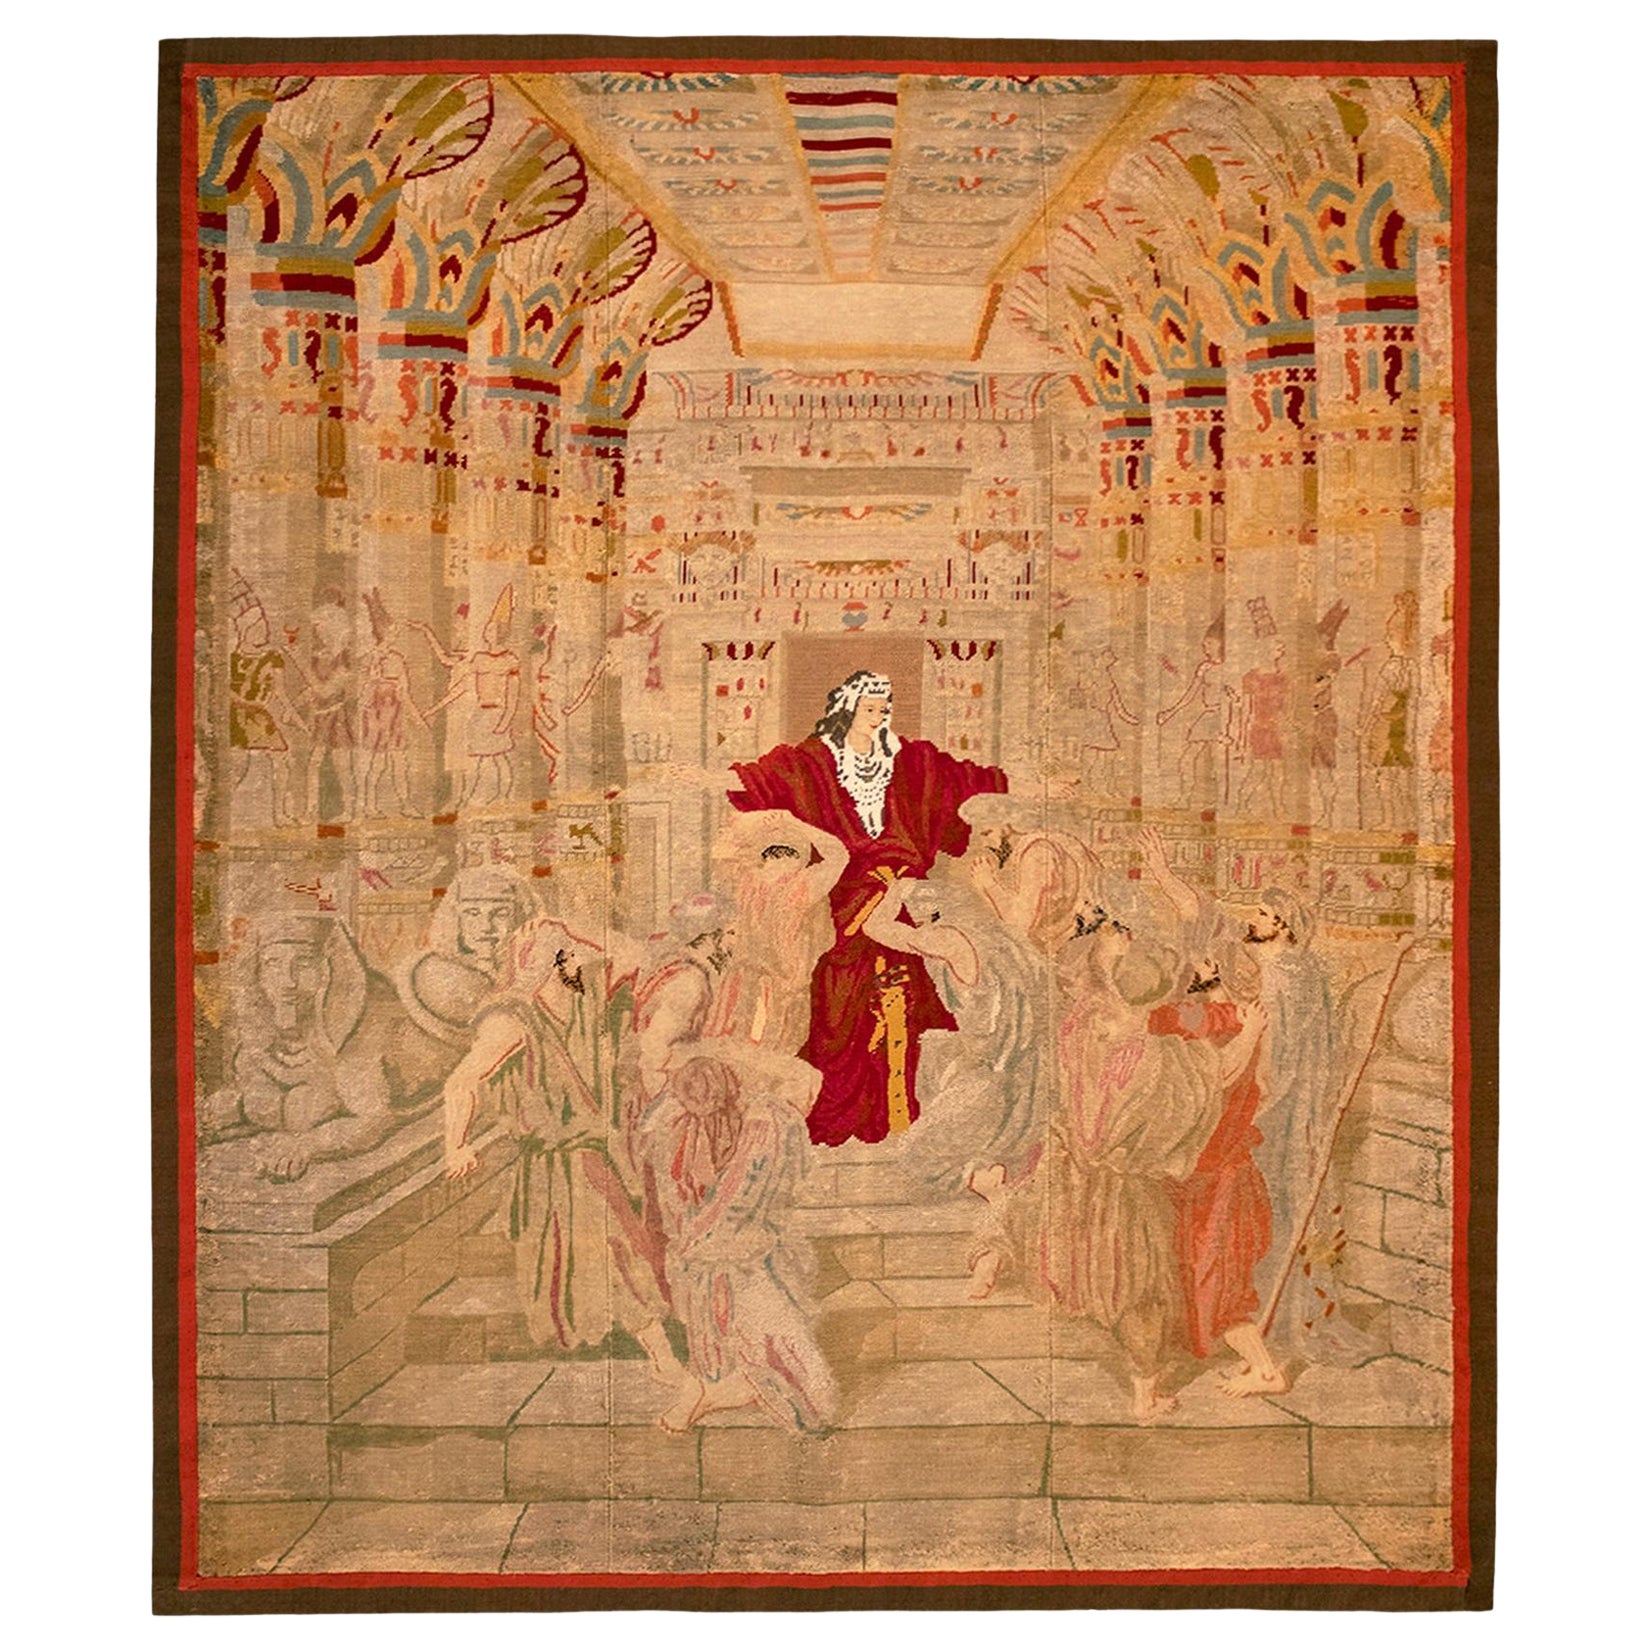 19th Century English Needlepoint Pictorial Tapestry, with the Queen of Sheba